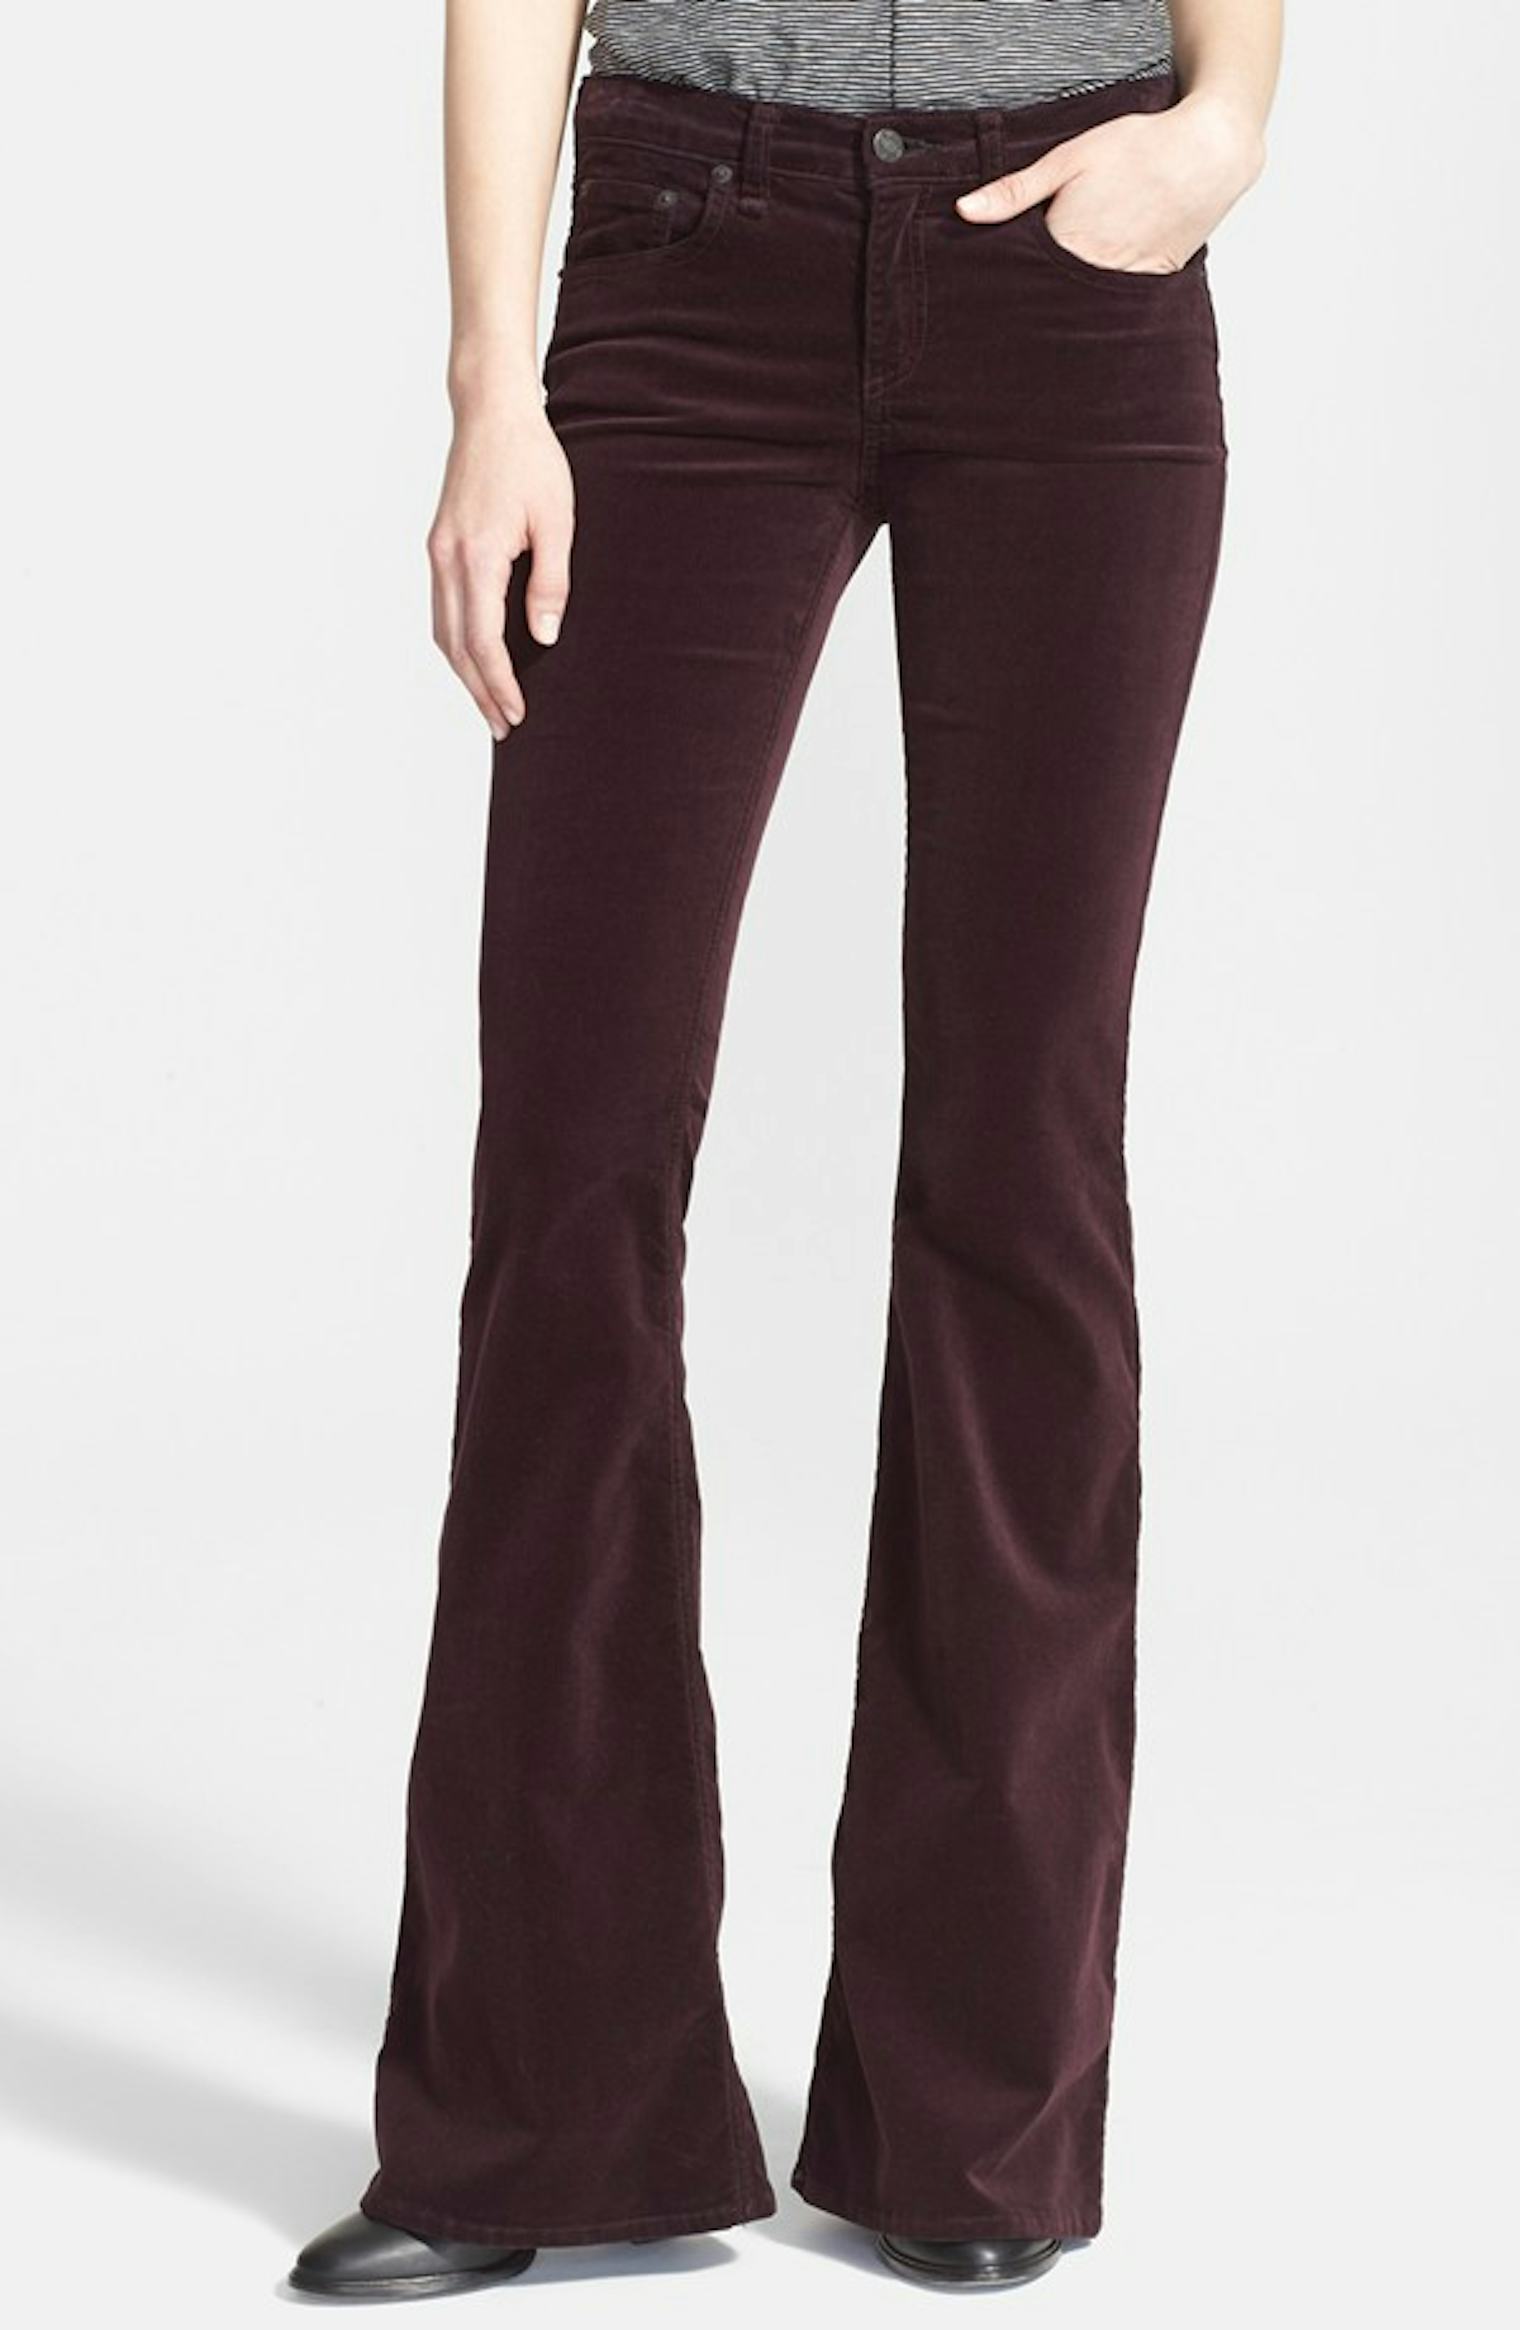 7 Best Flare Jeans For Fall, Because The '70s Look Is Timeless